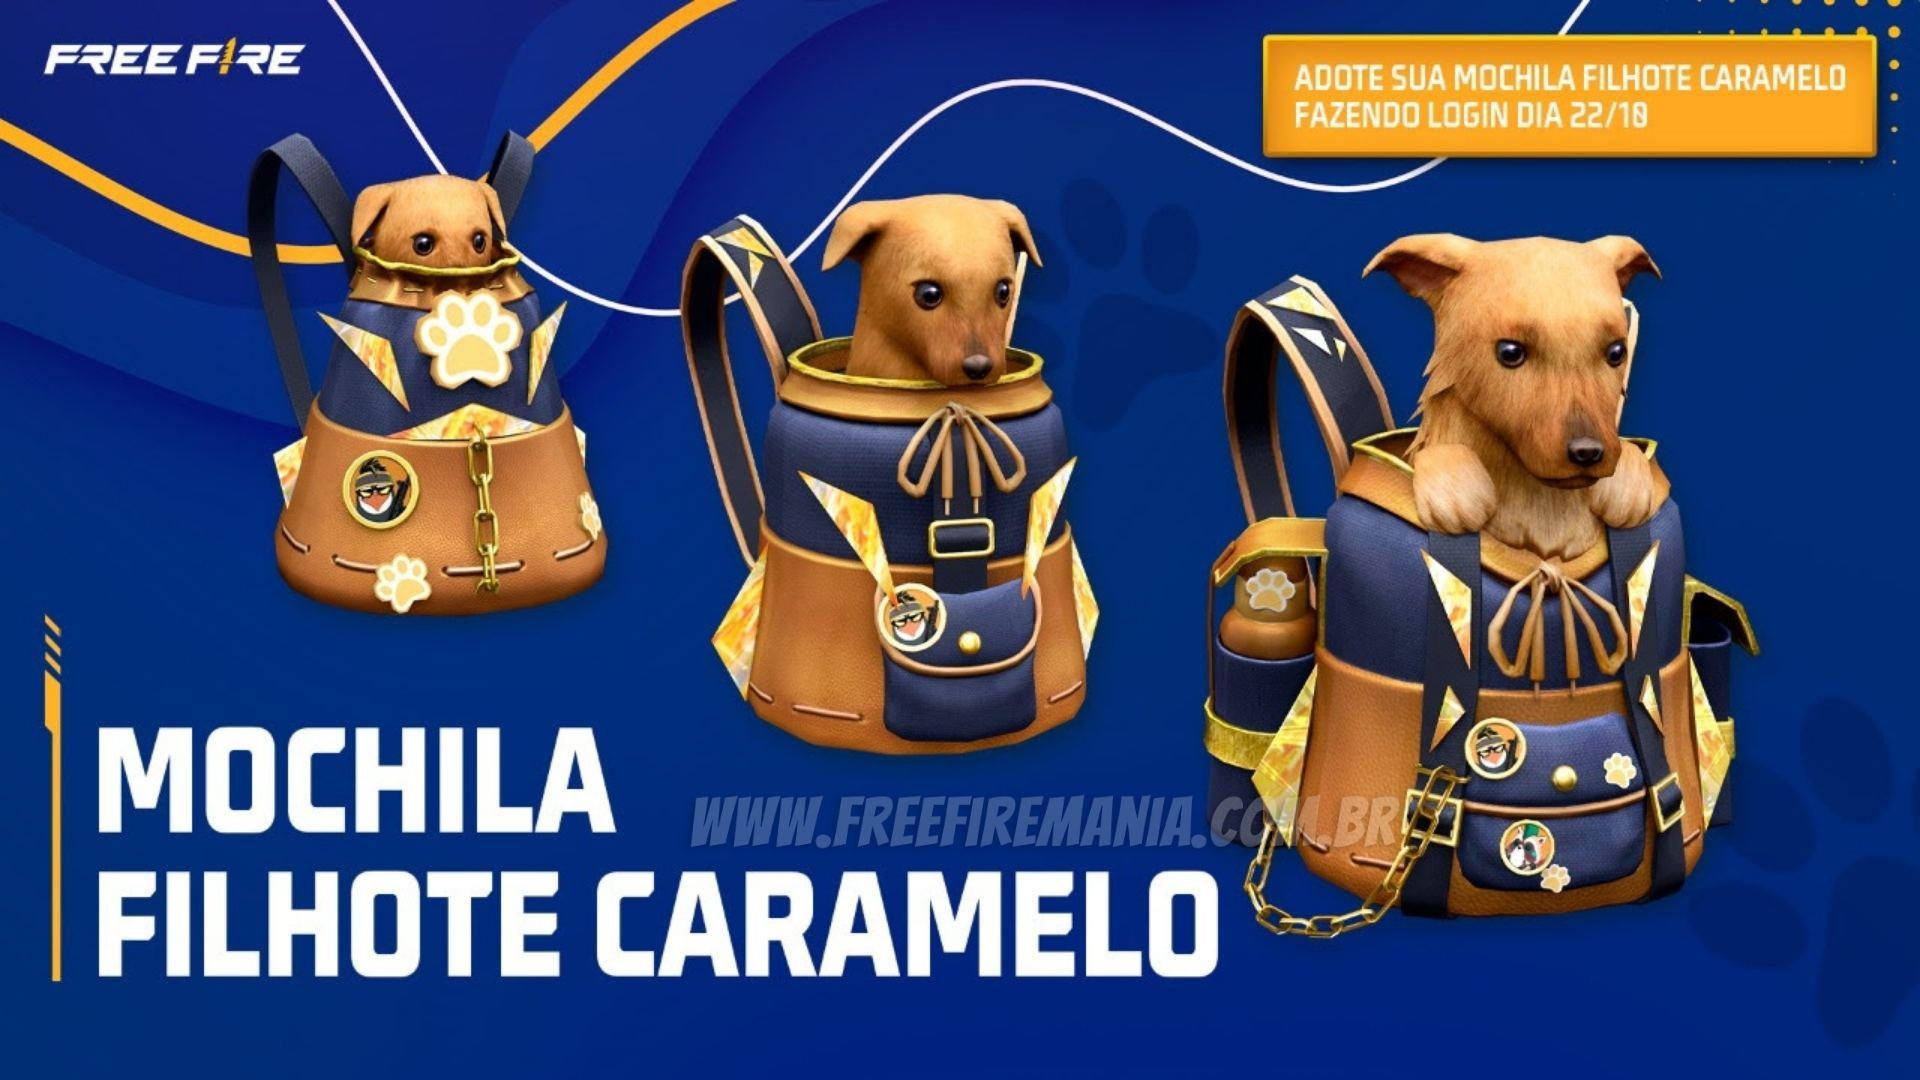 In the form of a backpack, a new item from “Cachorro Caramelo” brings more Brazilianness to Free Fire